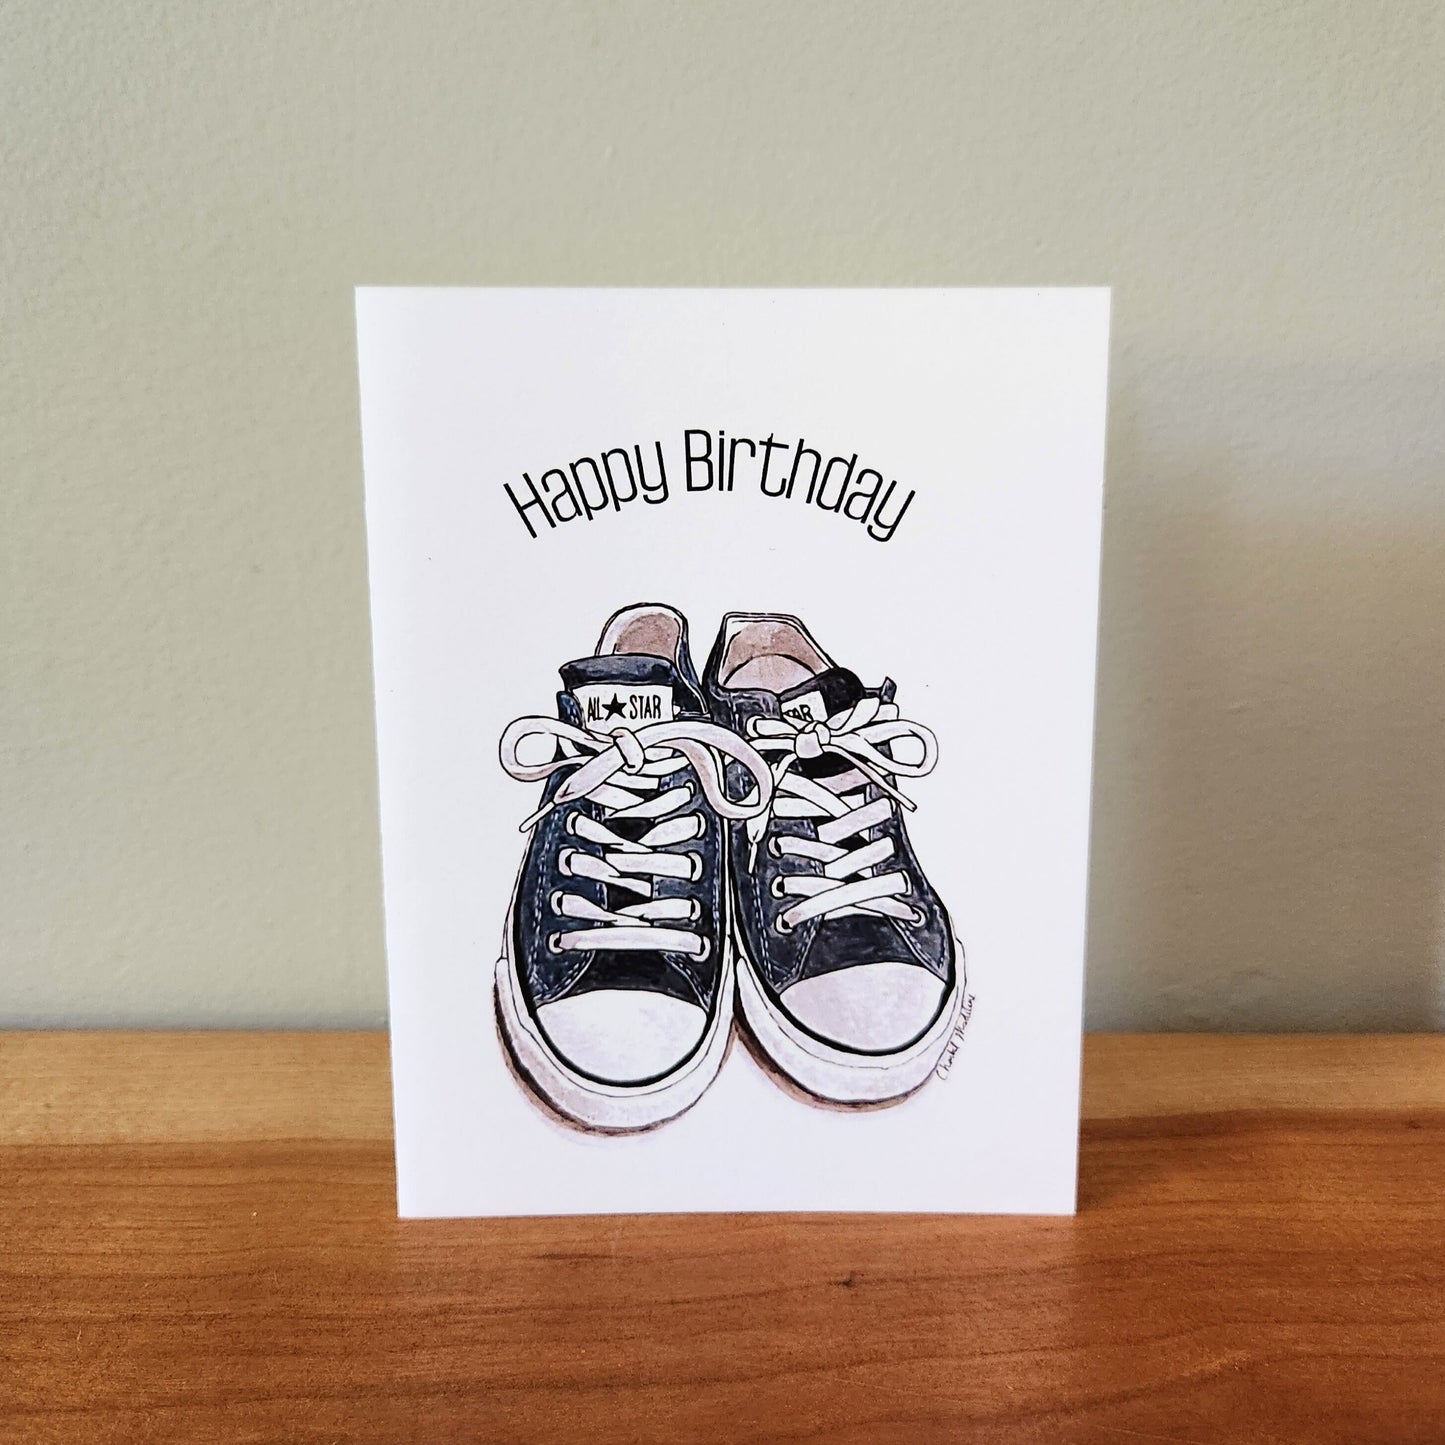 Happy birthday sneaker lover card, Kicks, Trainers shoe card, Blue all star, Fun birthday card for her, for him, for husband, wife, Friend